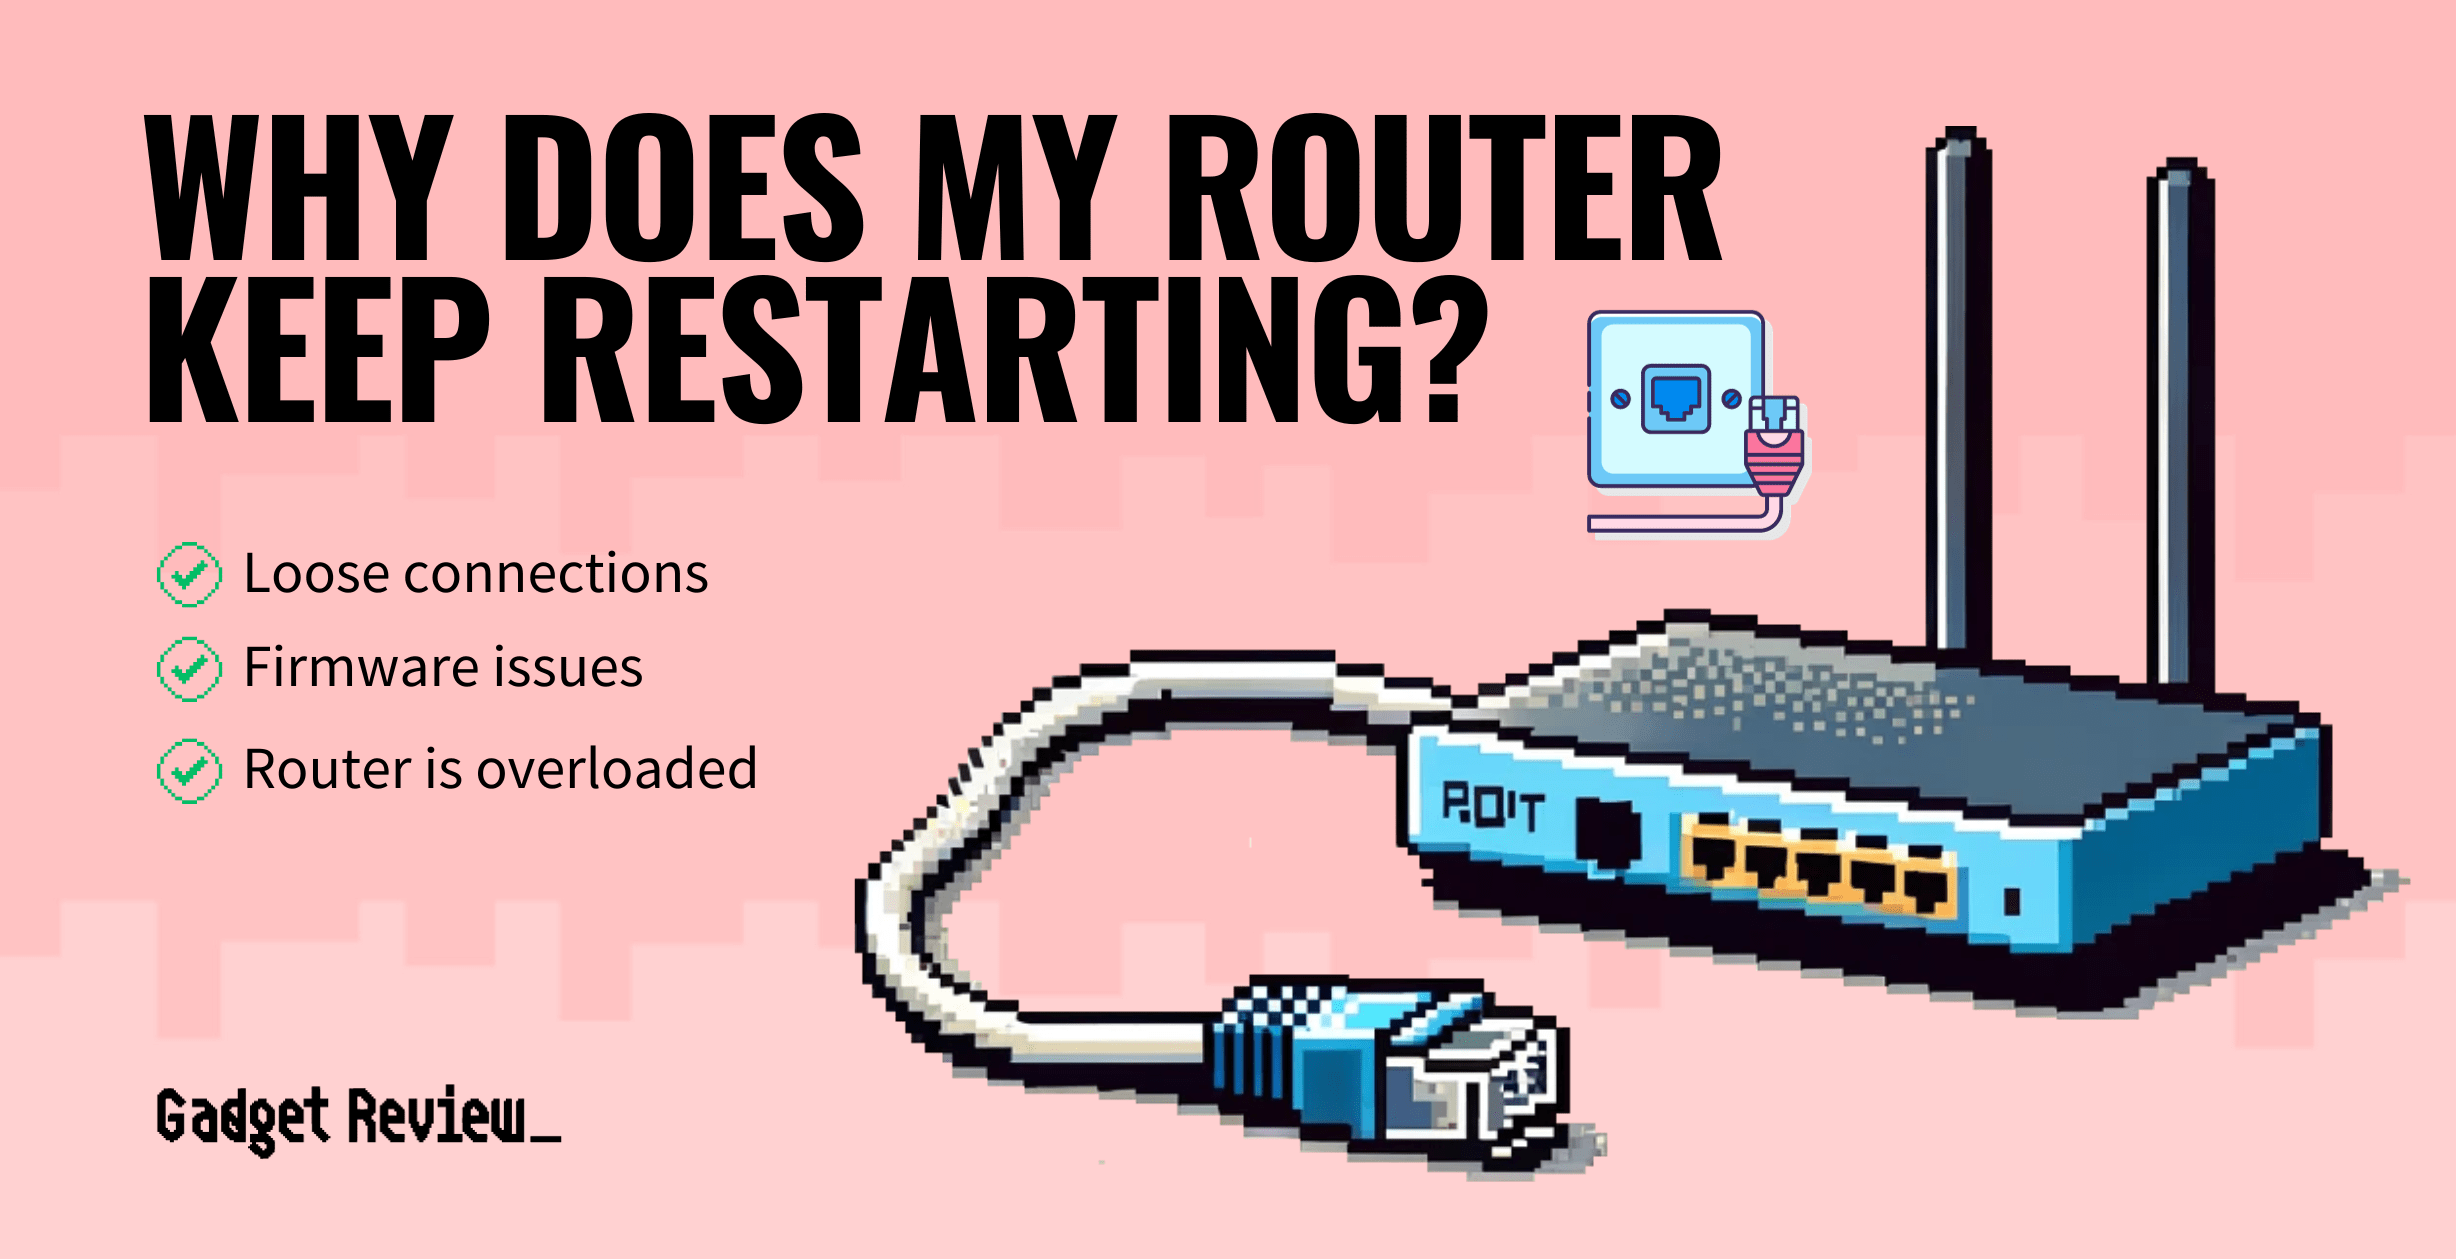 Why Does My Router Keep Restarting